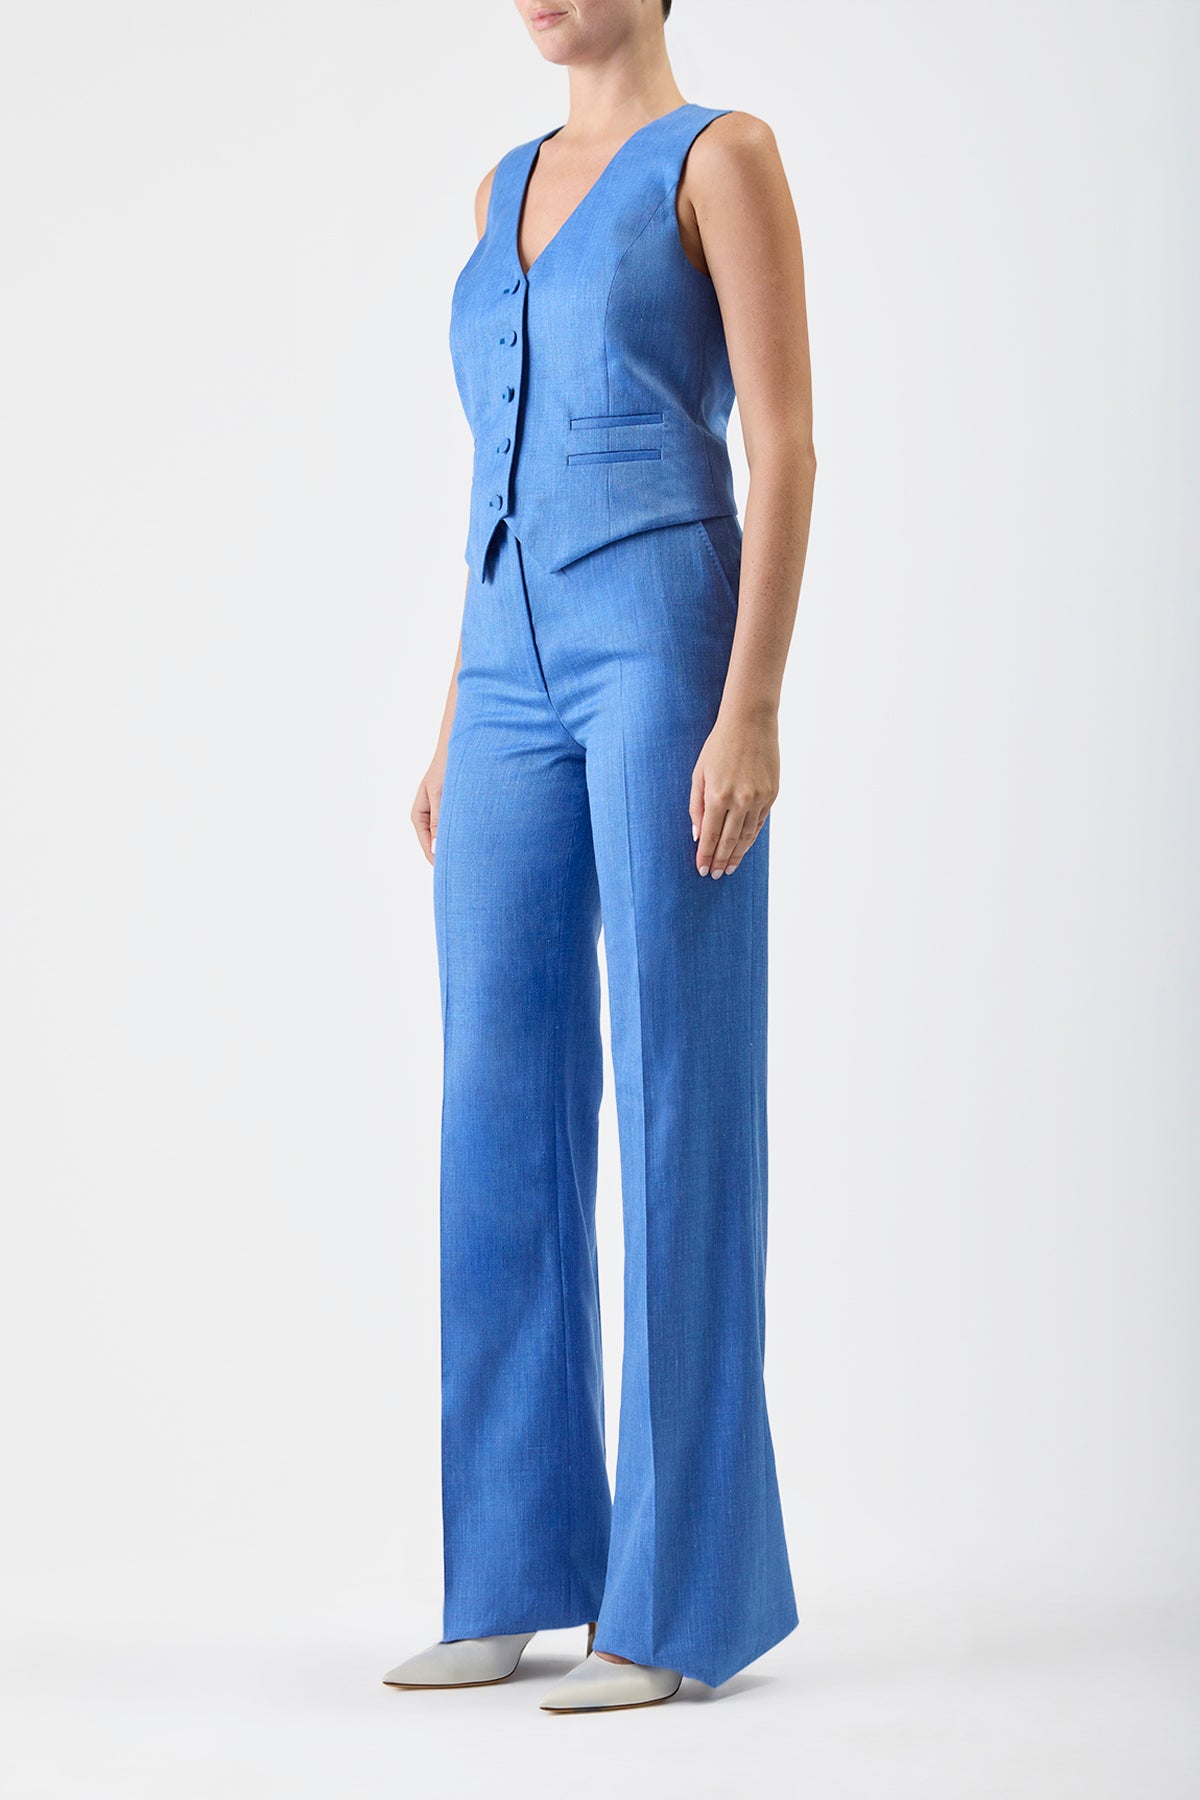 Vesta Pant in Sapphire Silk Wool with Linen